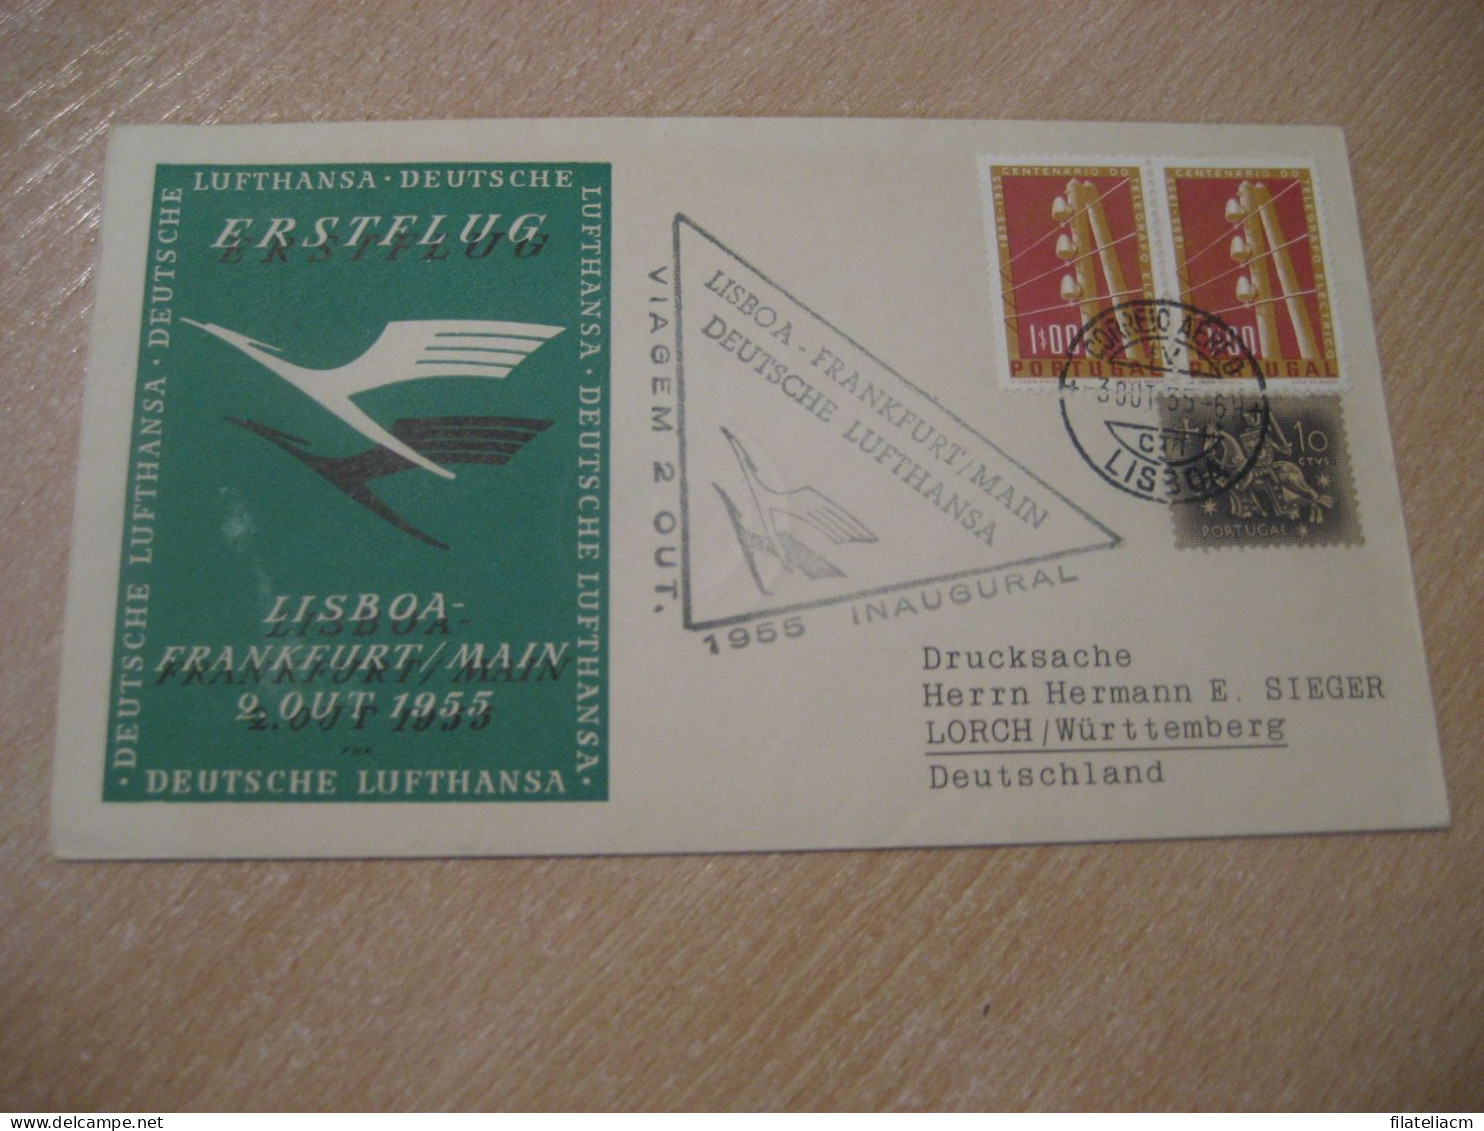 LISBOA - FRANKFURT 1955 To Lorch First Flight Inaugural Lufthansa Cancel Cover PORTUGAL GERMANY - Covers & Documents